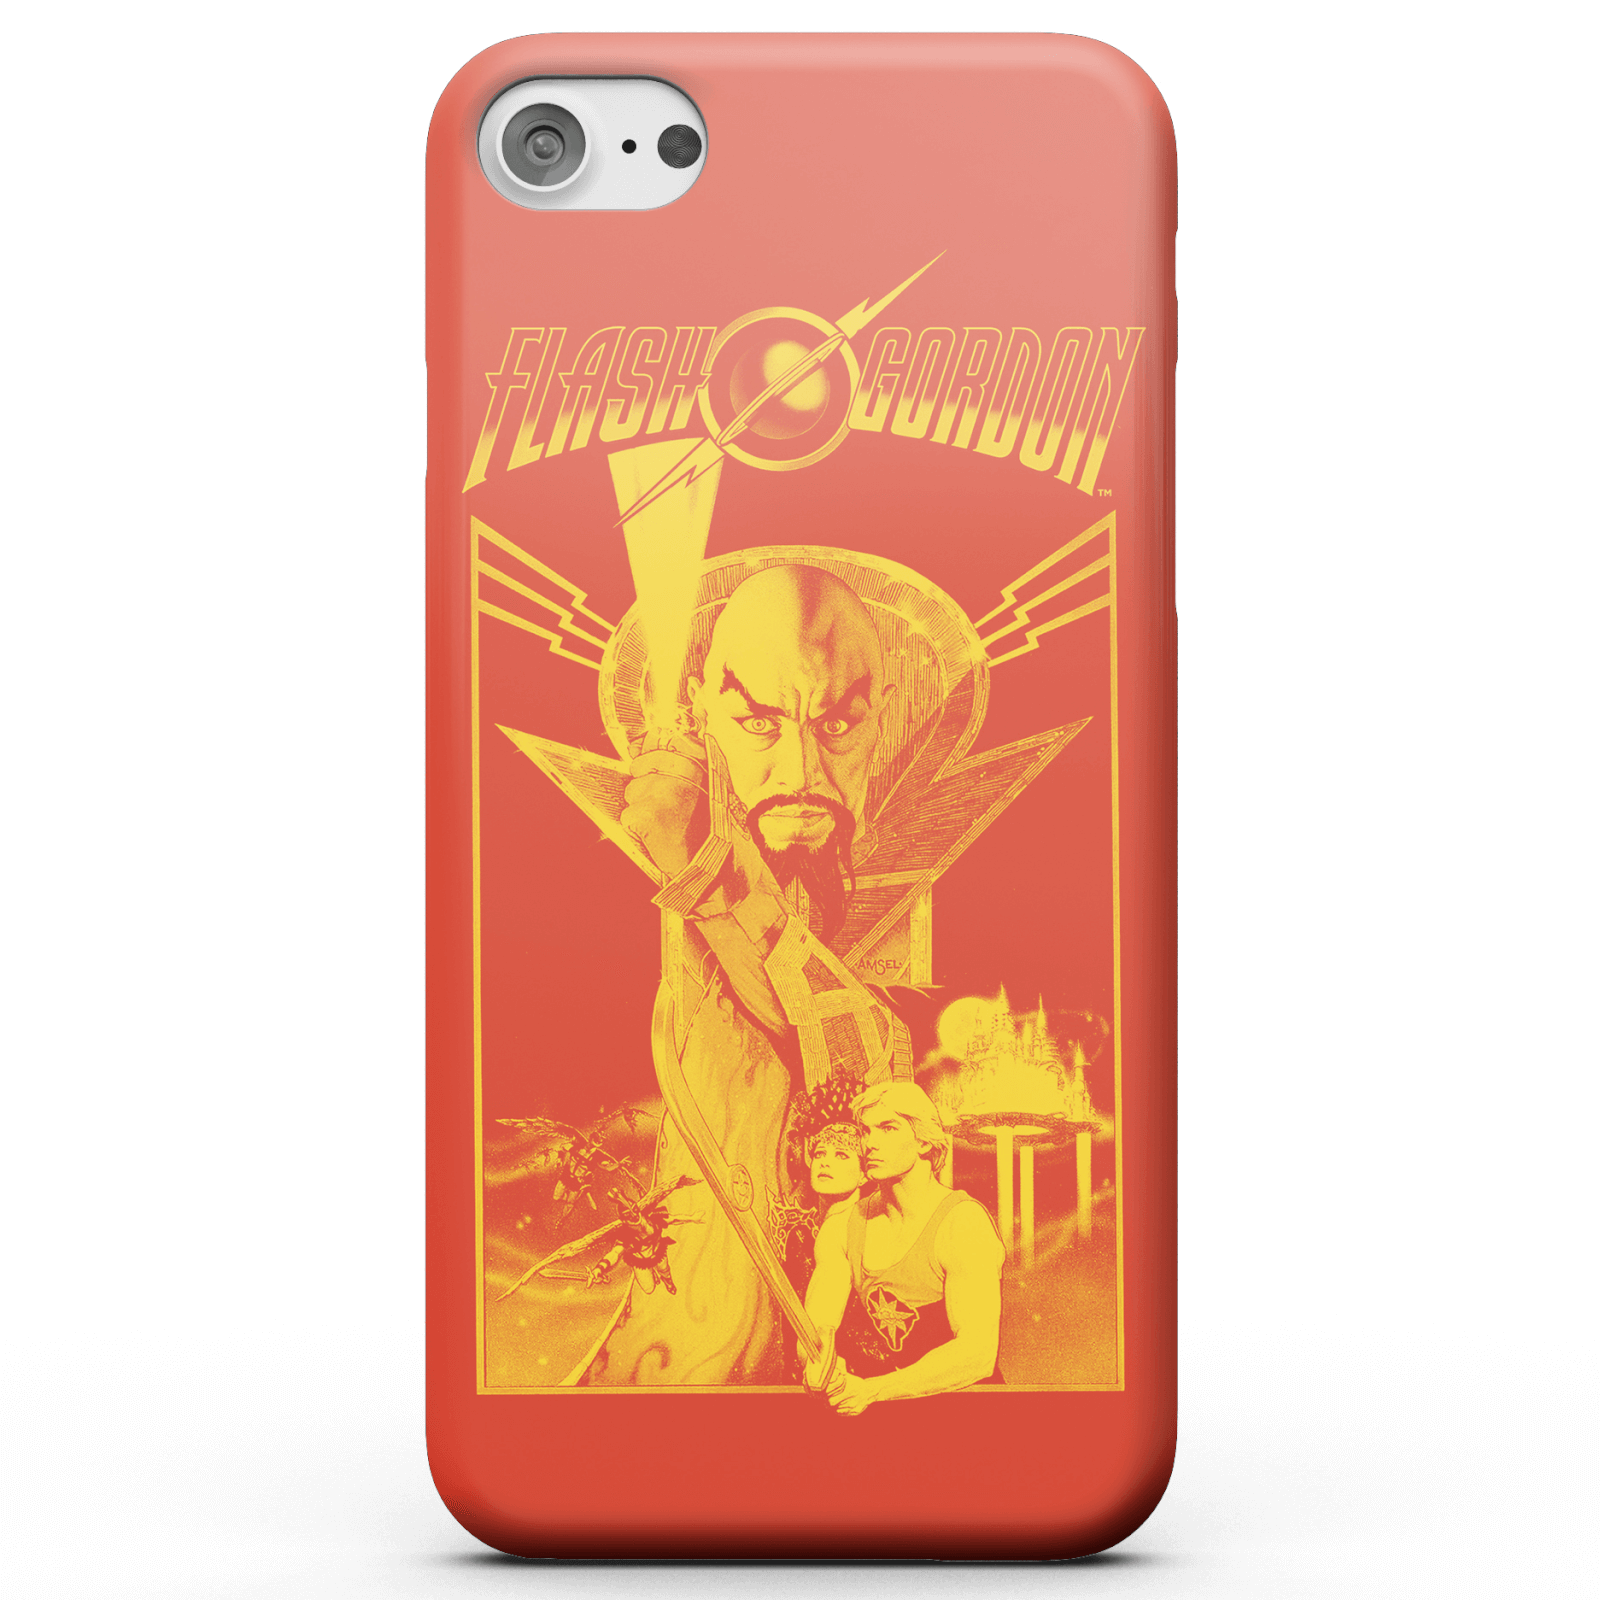 Flash Gordon Retro Movie Phone Case for iPhone and Android - iPhone 5C - Snap Case - Matte